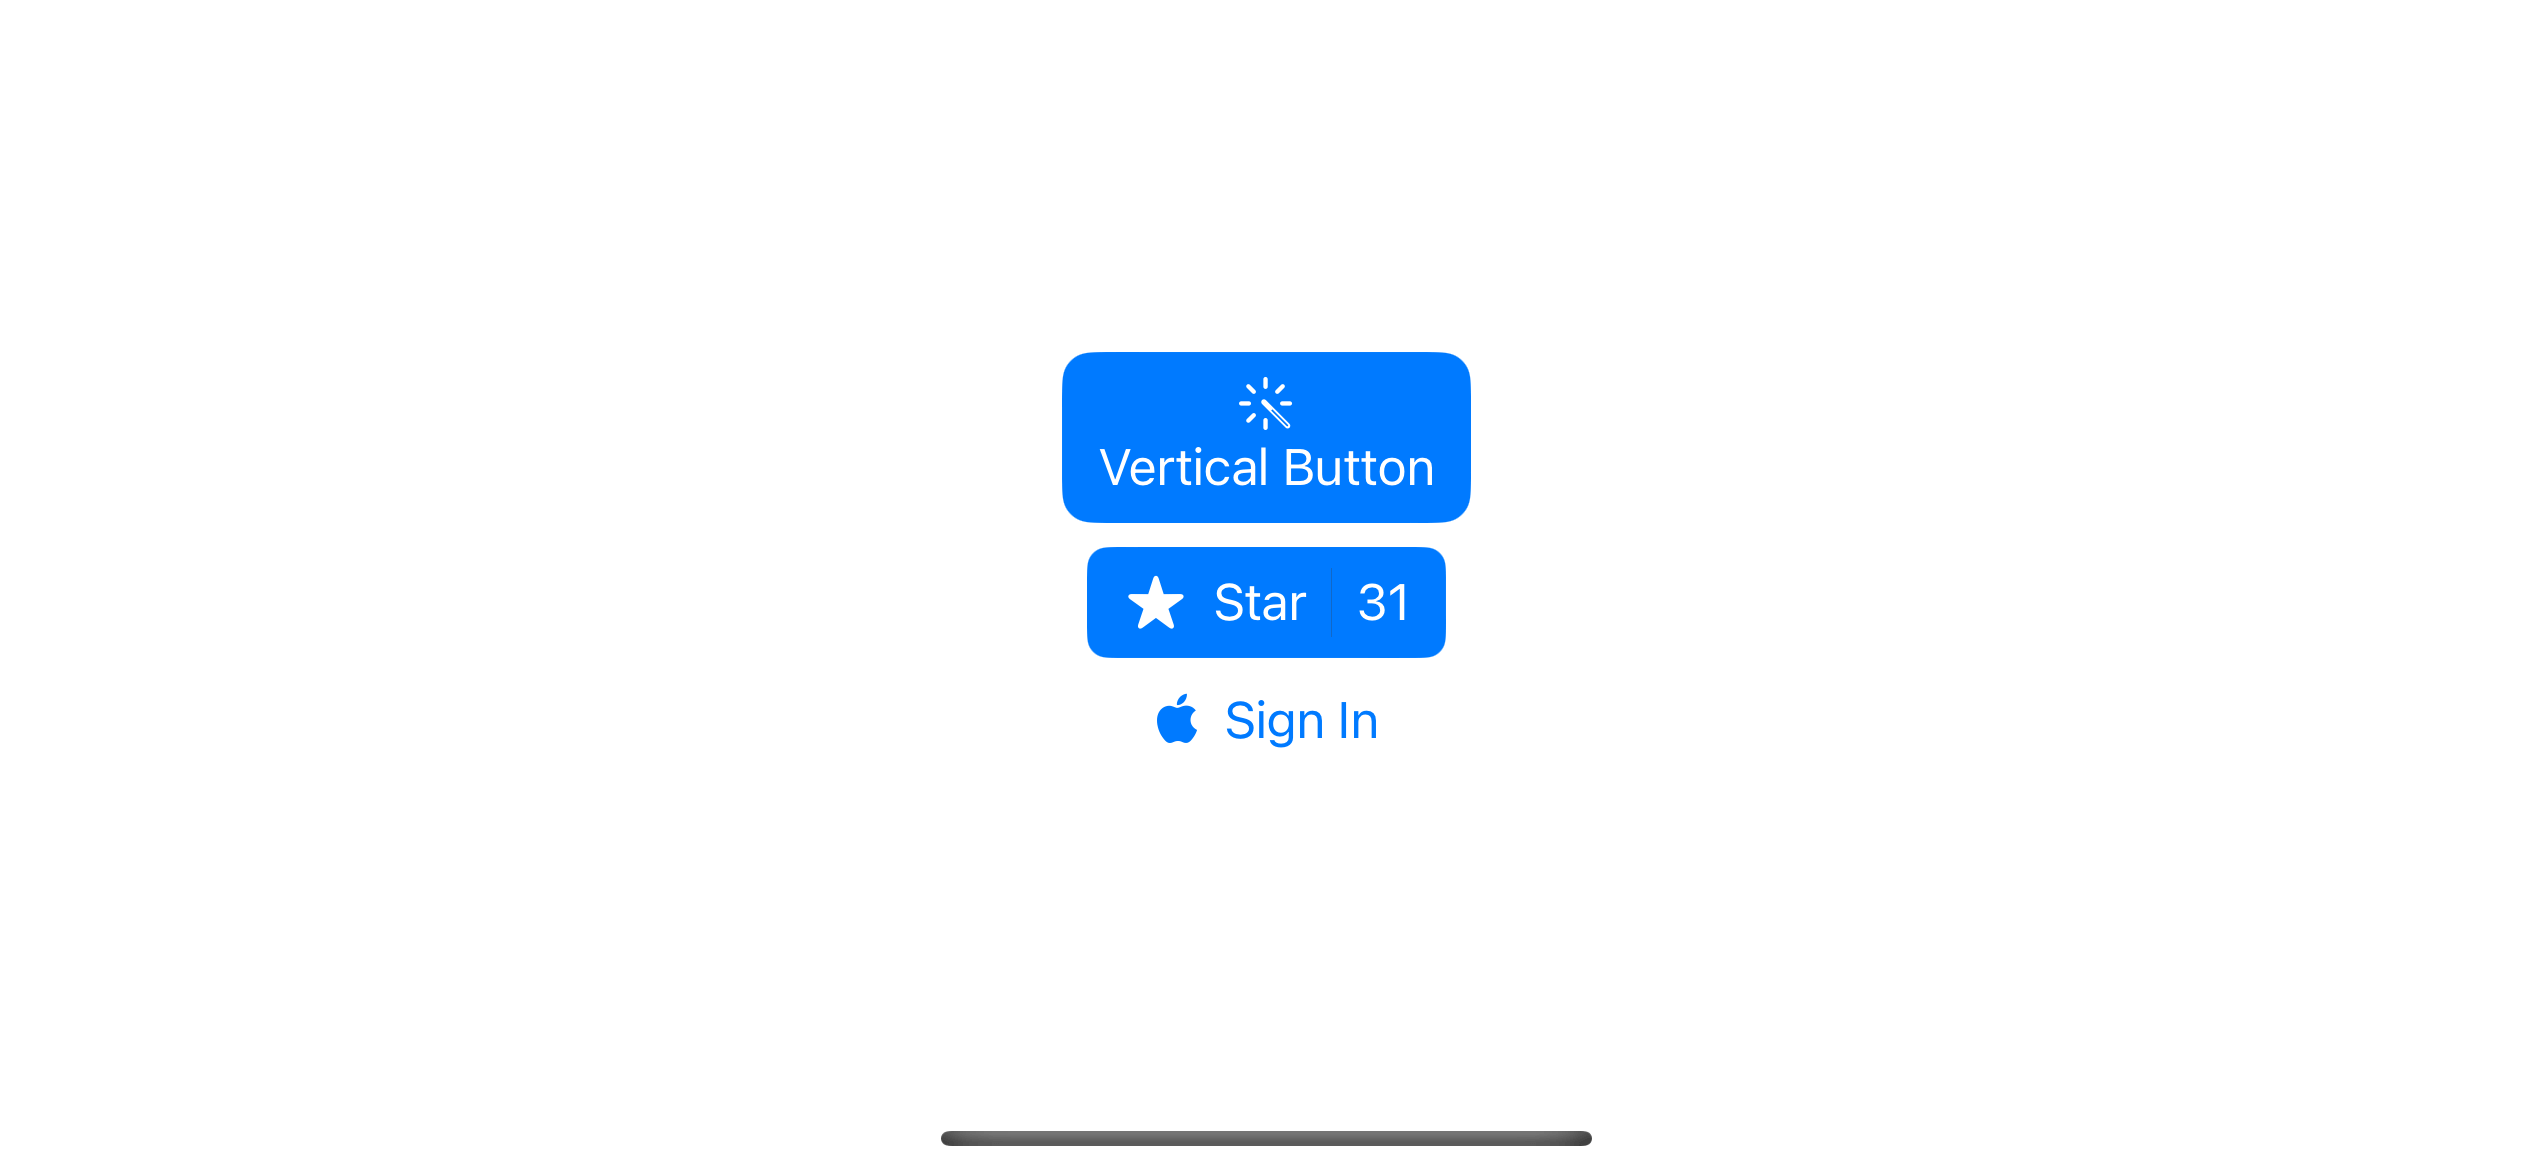 You can use any view as a button's label.